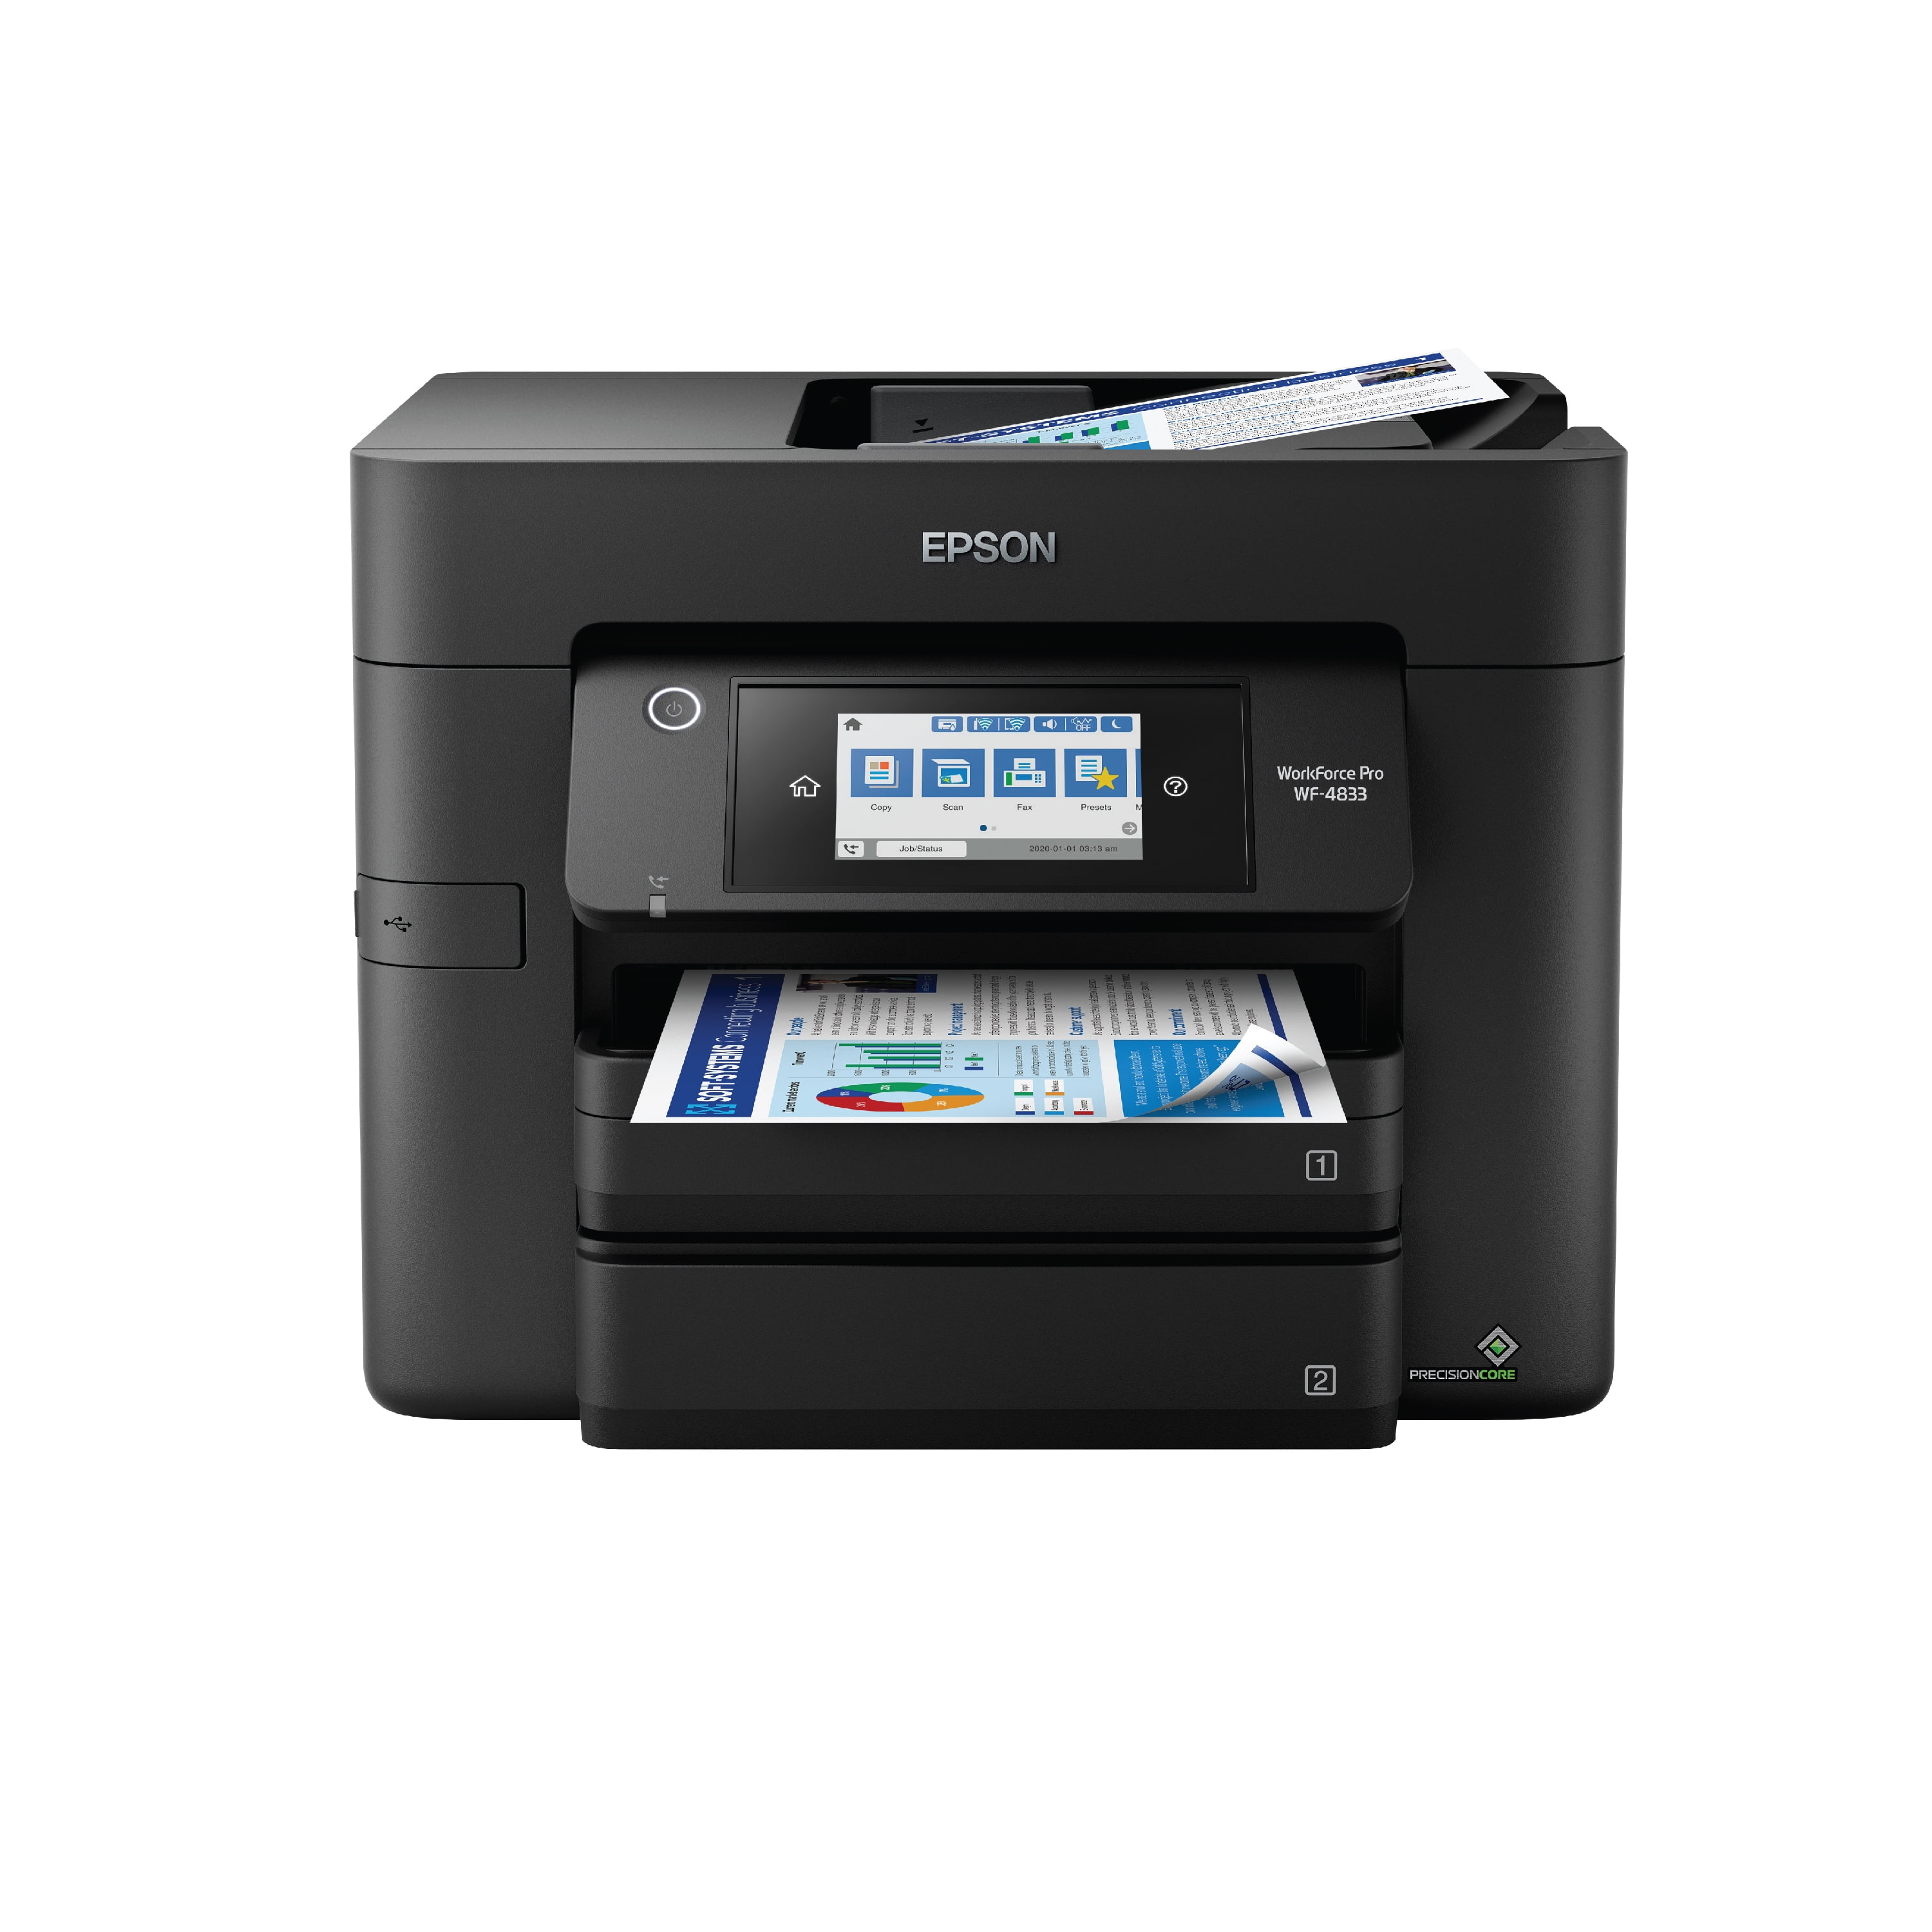 Epson WorkForce Pro WF-4833 Wireless All-in-One Printer with Auto 2-Sided Print, Copy, Scan and Fax, ADF, 500-Sheet Paper Capacity, and Color Touchscreen - Walmart.com